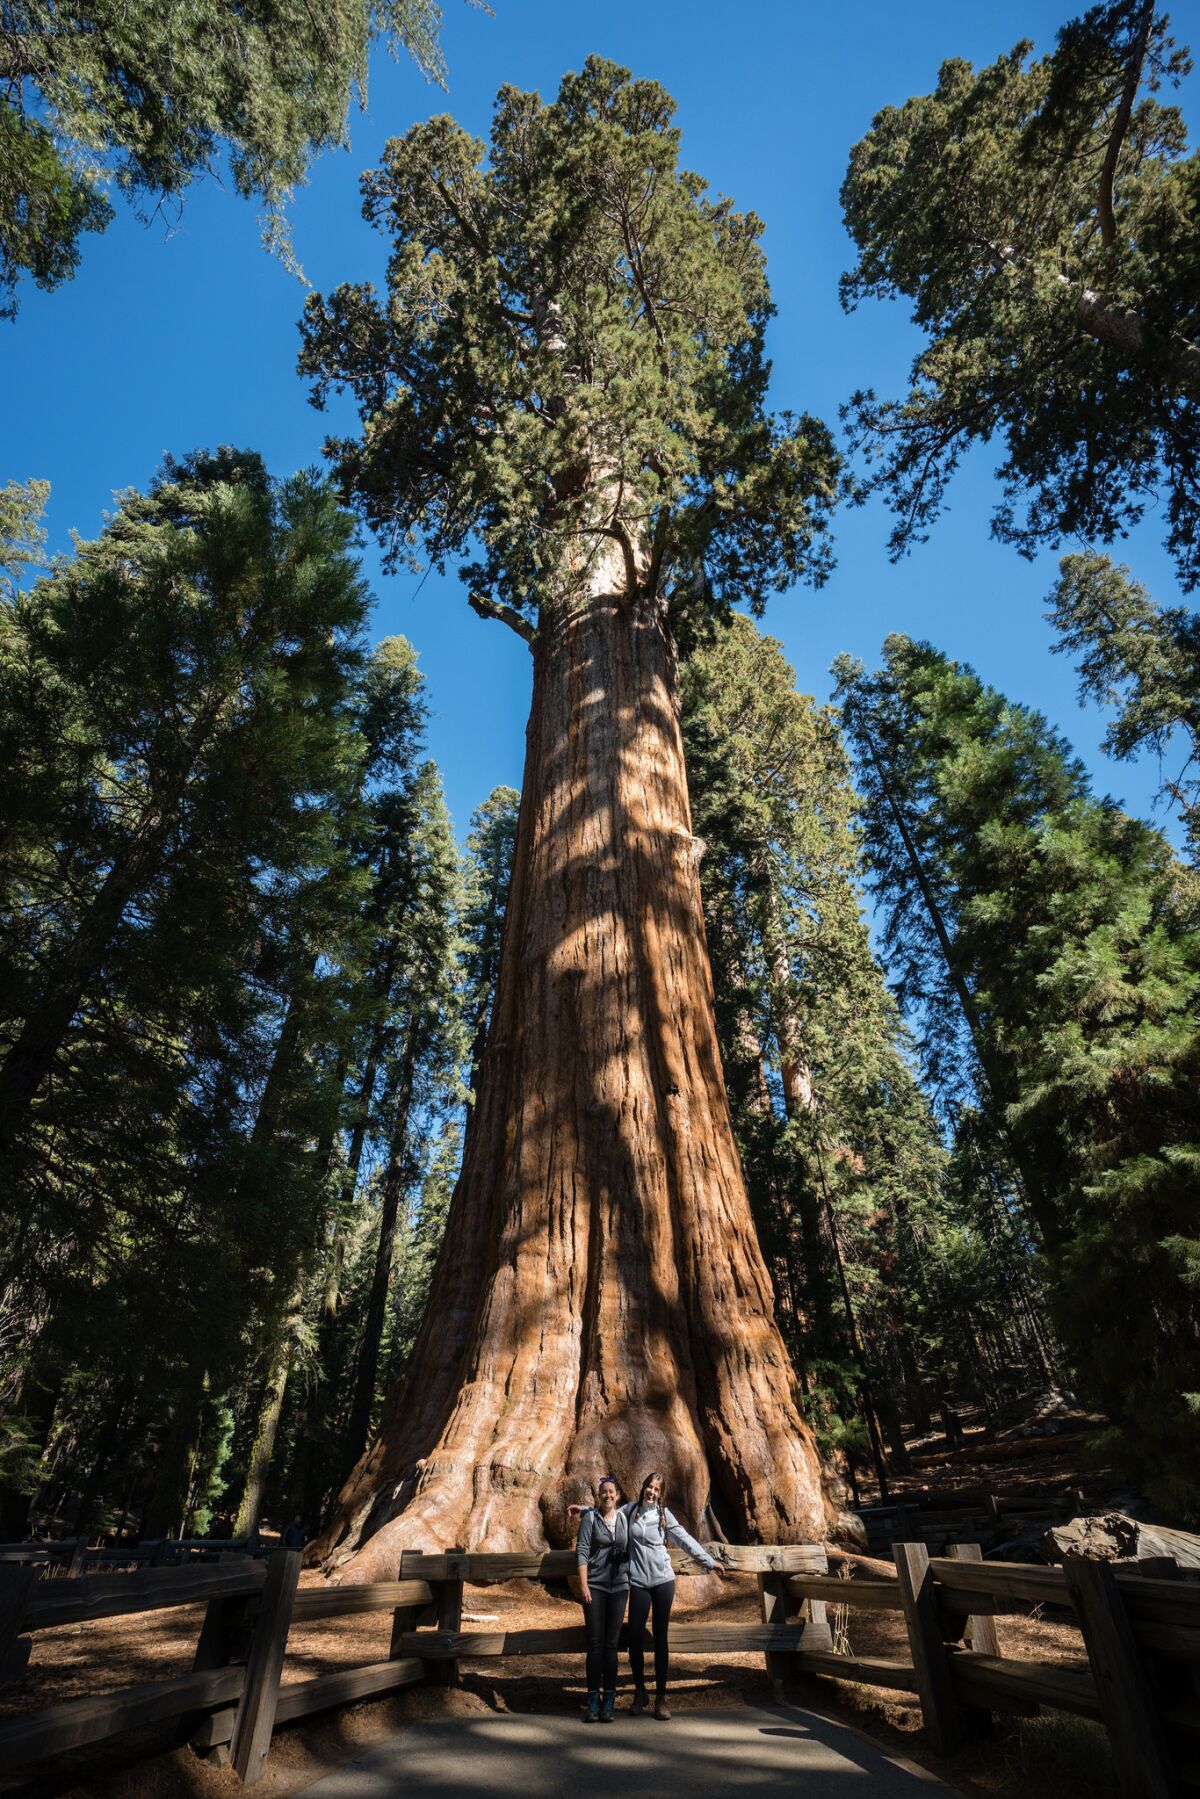 The General Sherman Tree is a giant sequoia in Sequoia National Park.